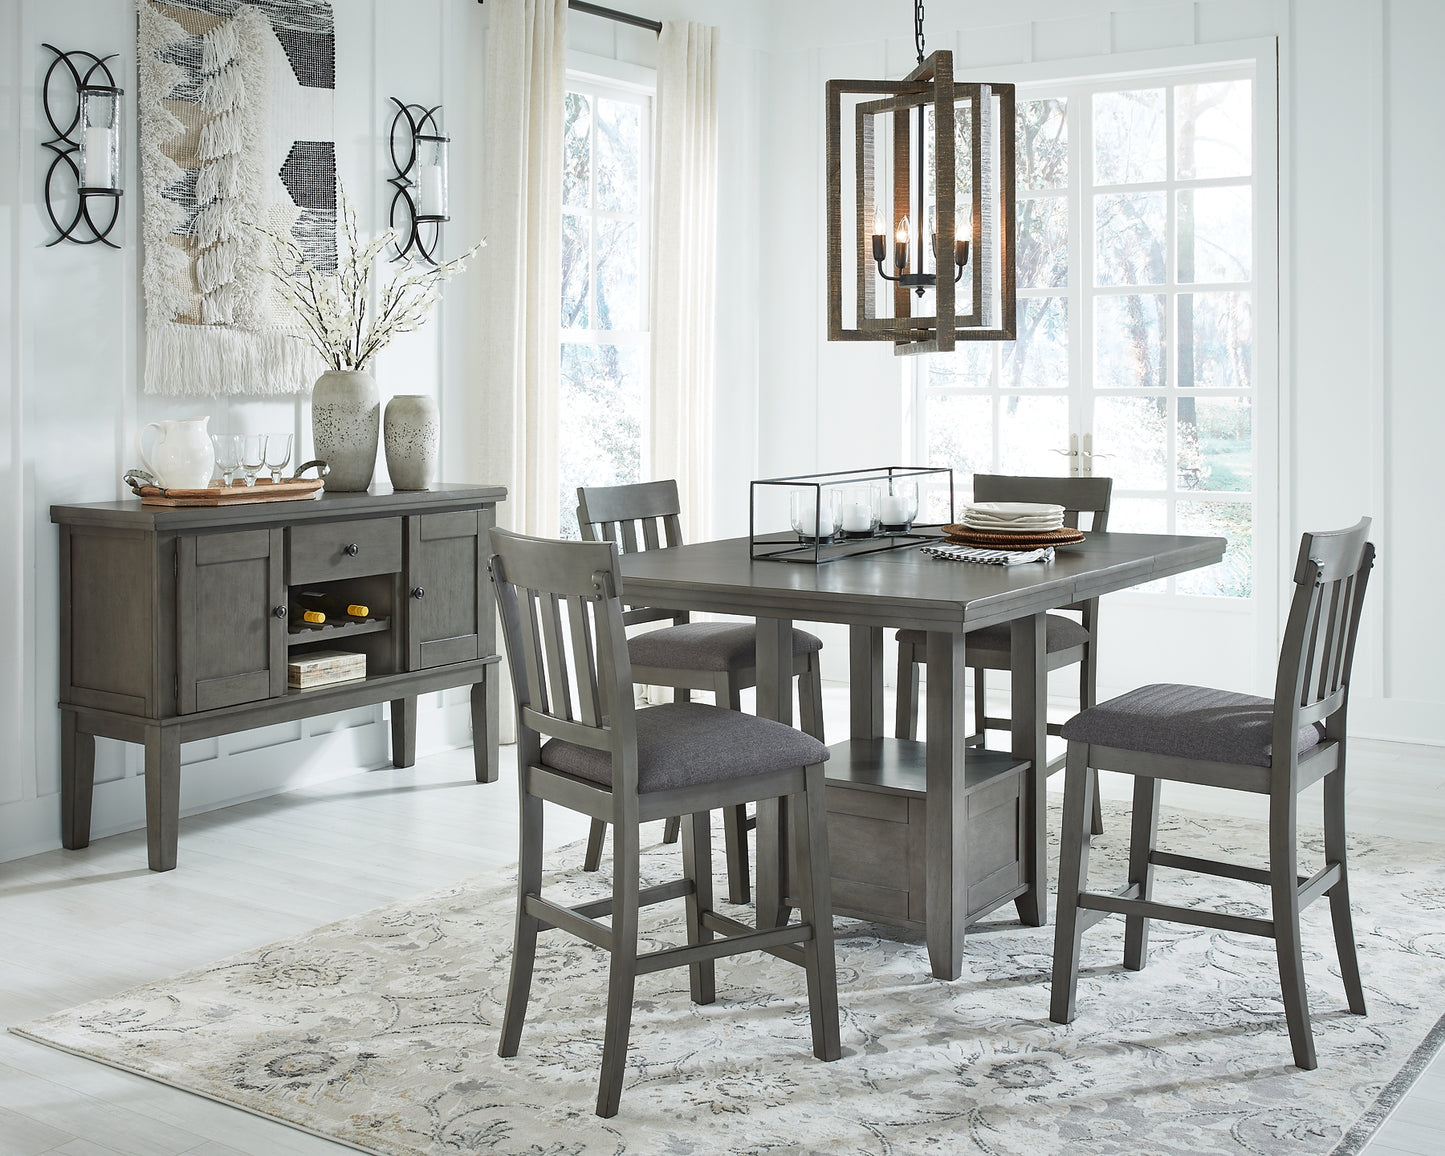 Hallanden Counter Height Dining Table and 4 Barstools with Storage Wilson Furniture (OH)  in Bridgeport, Ohio. Serving Bridgeport, Yorkville, Bellaire, & Avondale